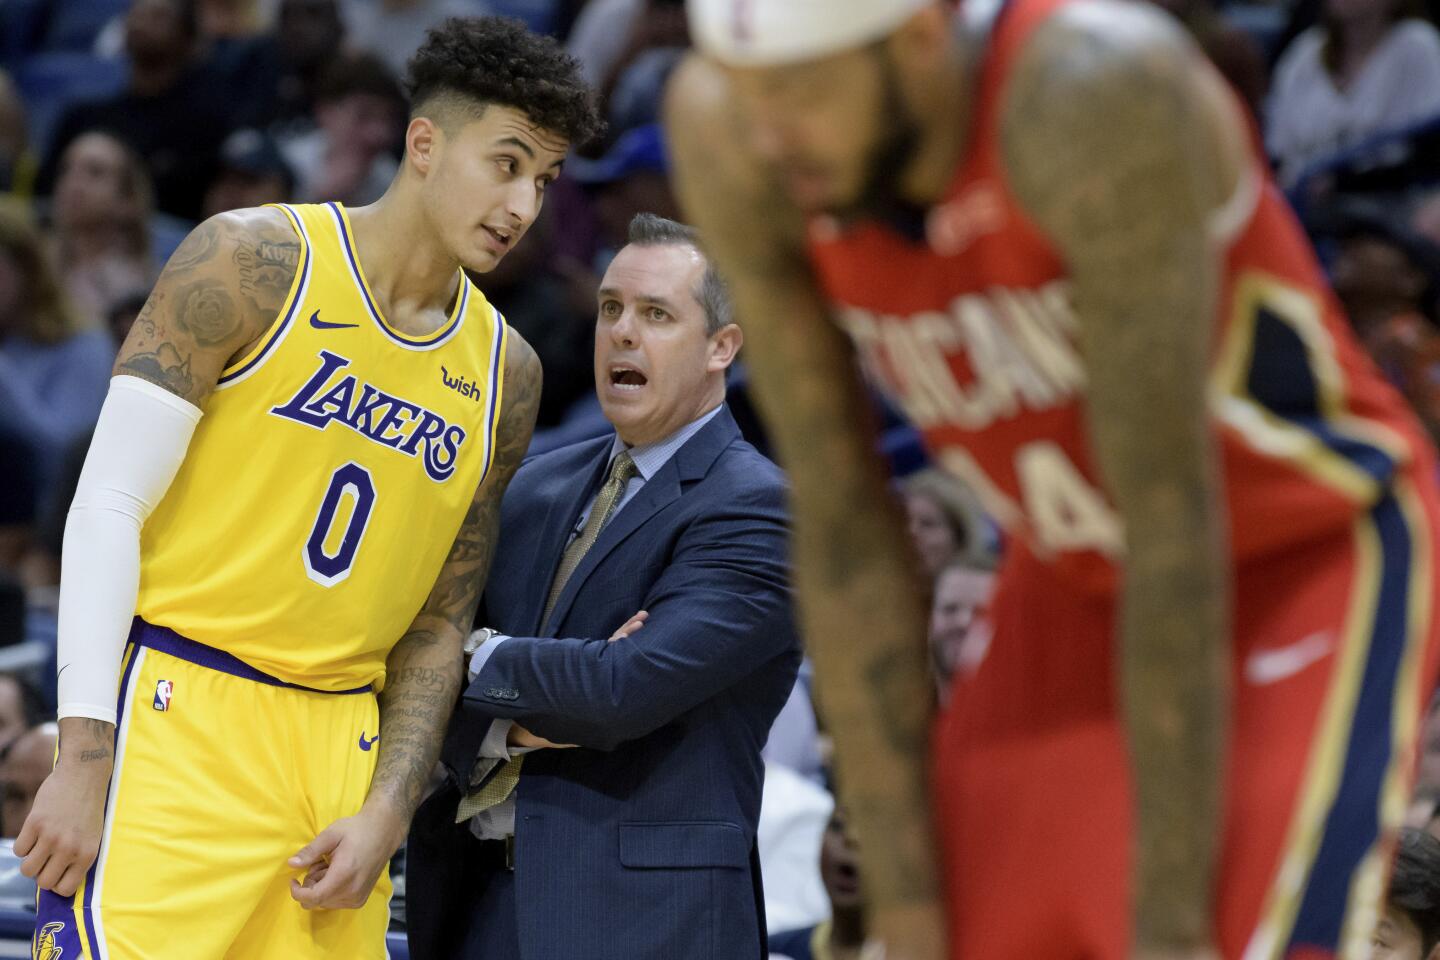 Lakers forward Kyle Kuzma talks to coach Frank Vogel during the first half of a game Nov. 27 against the Pelicans at Smoothie King Center.